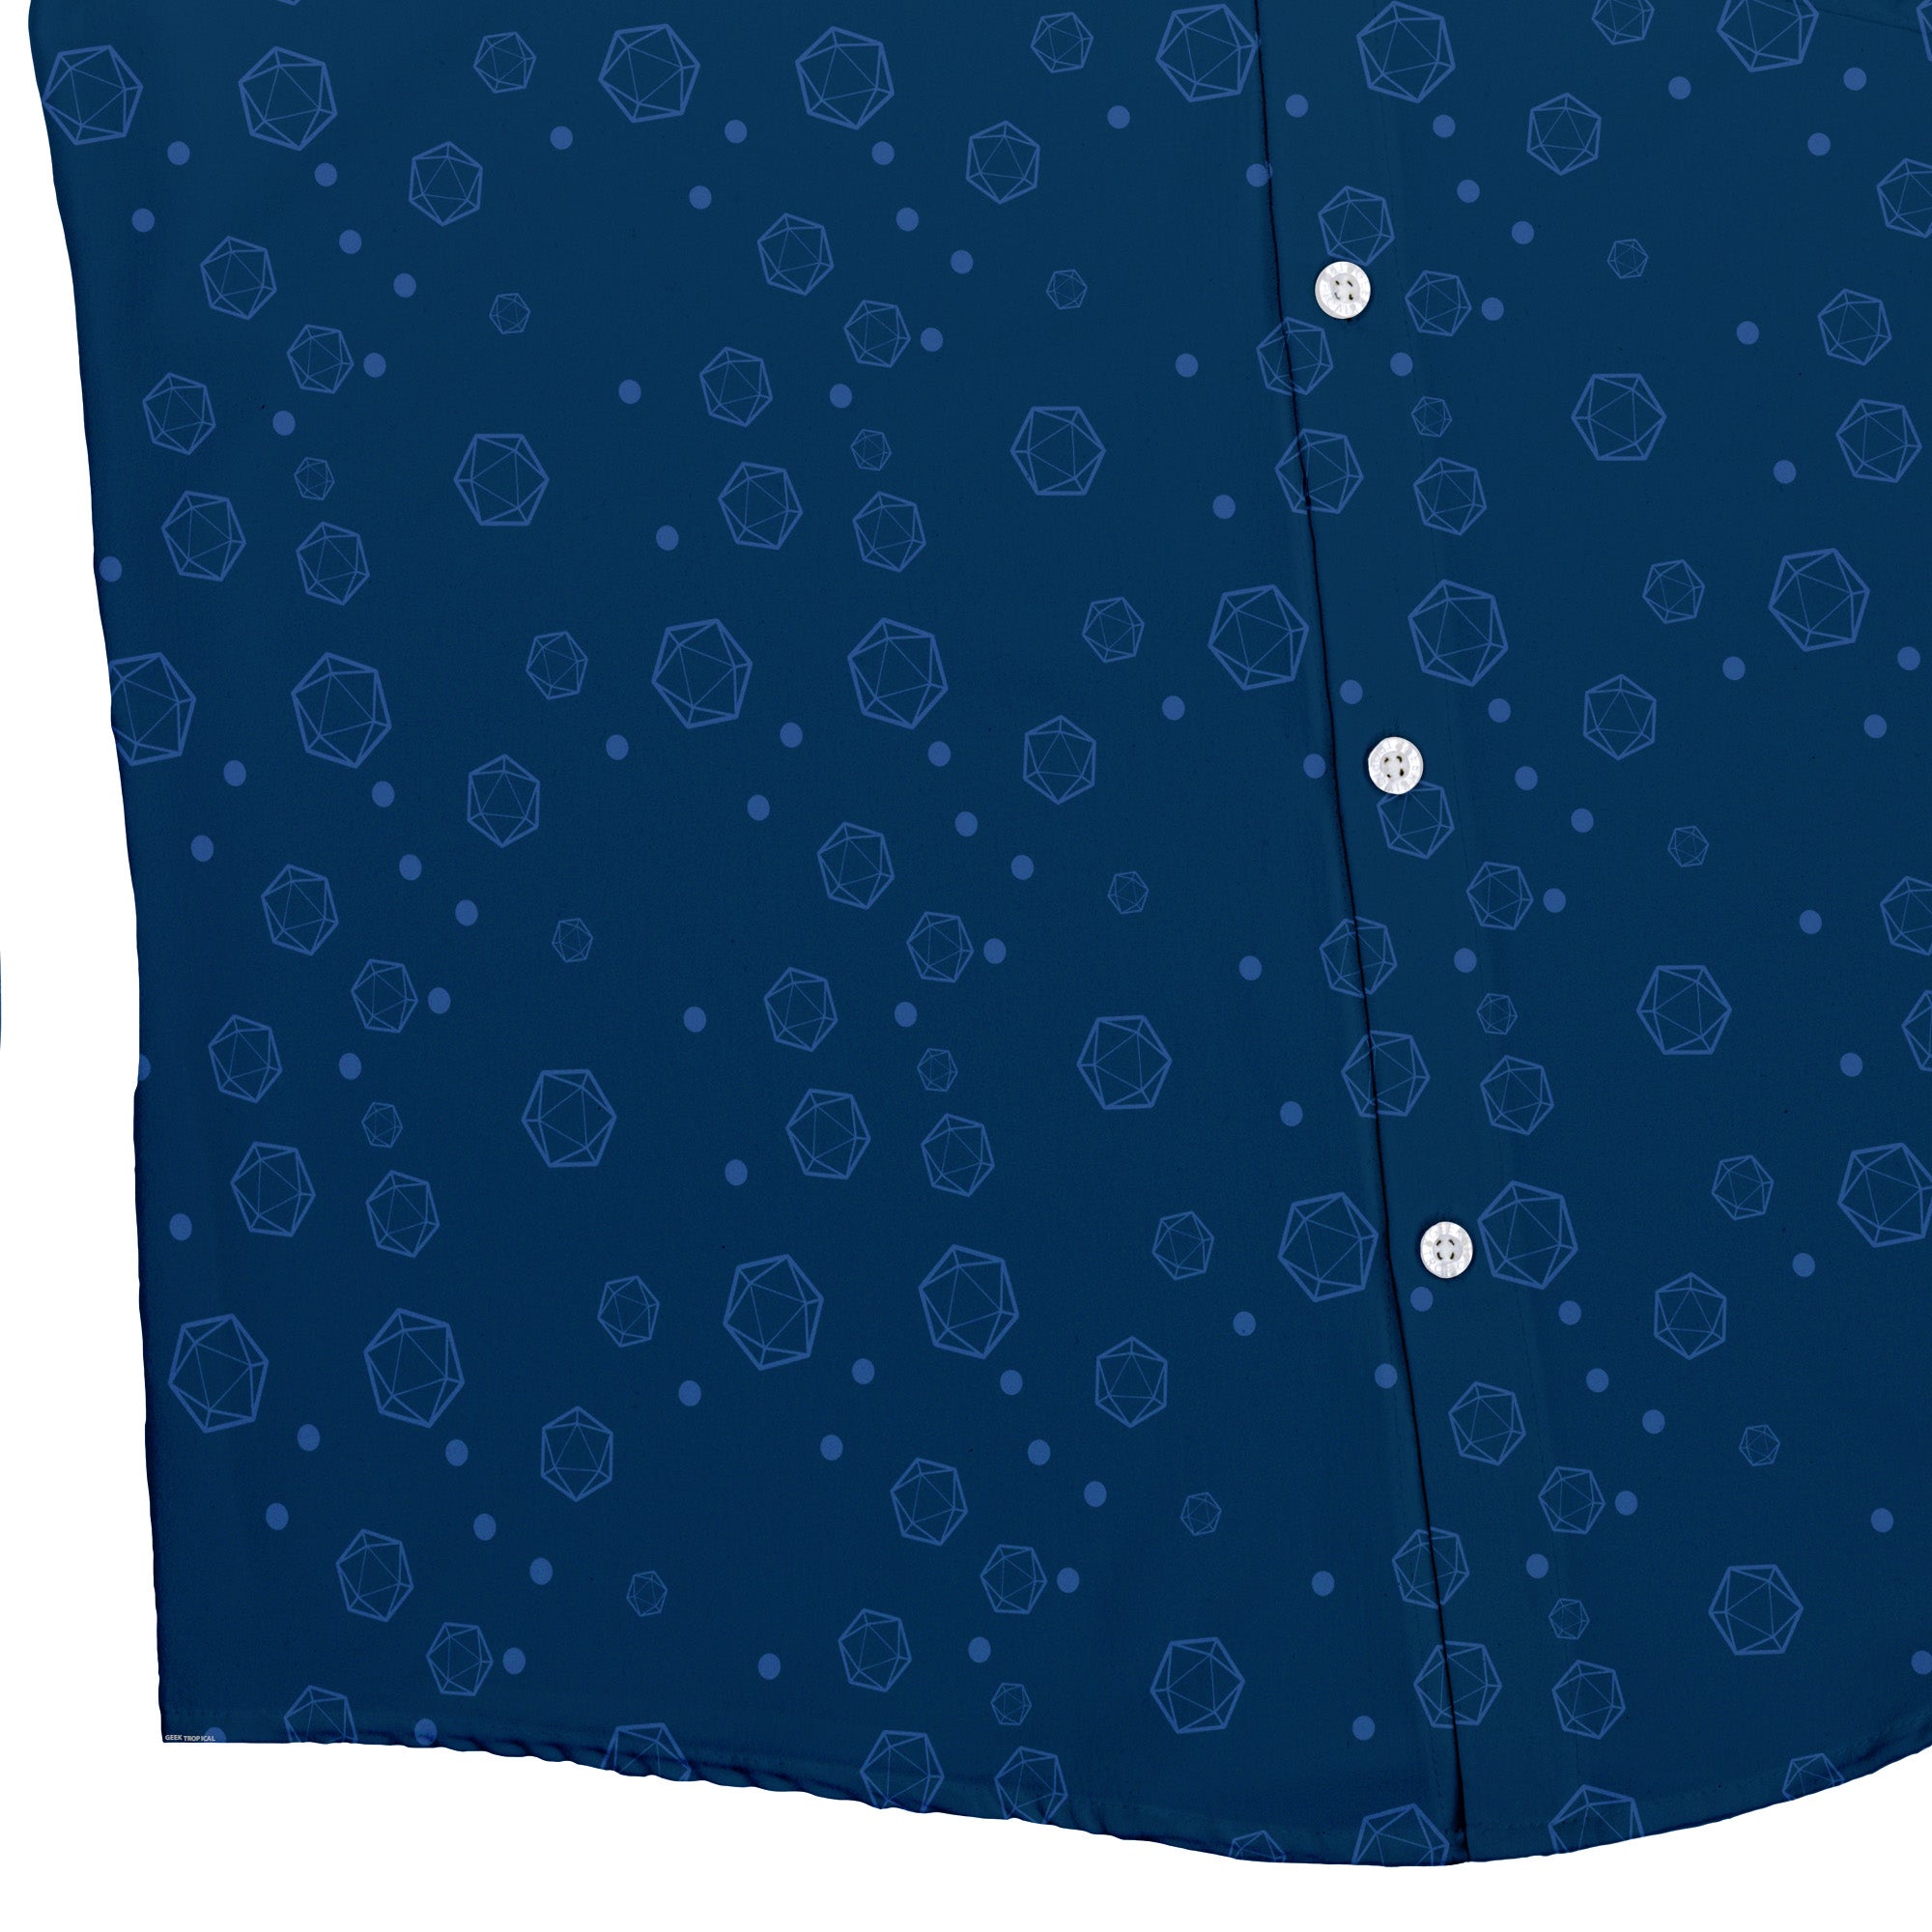 Dnd Dice Bubbles Button Up Shirt - adult sizing - Design by Heather Davenport - dnd & rpg print